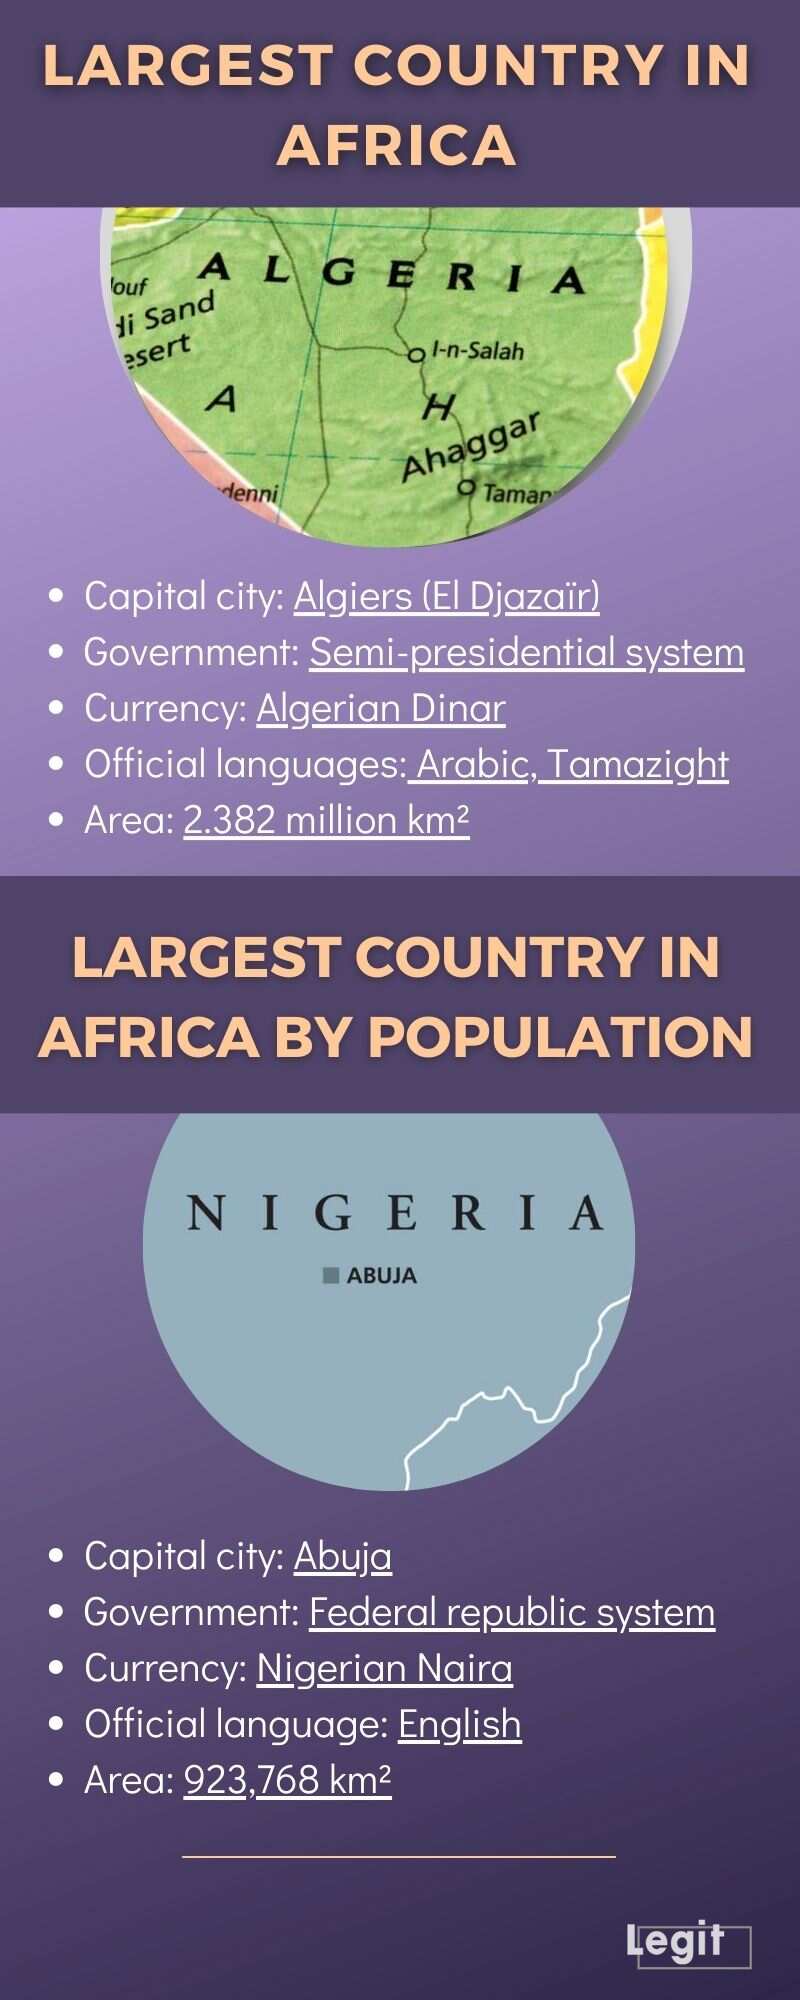 Largest country in Africa